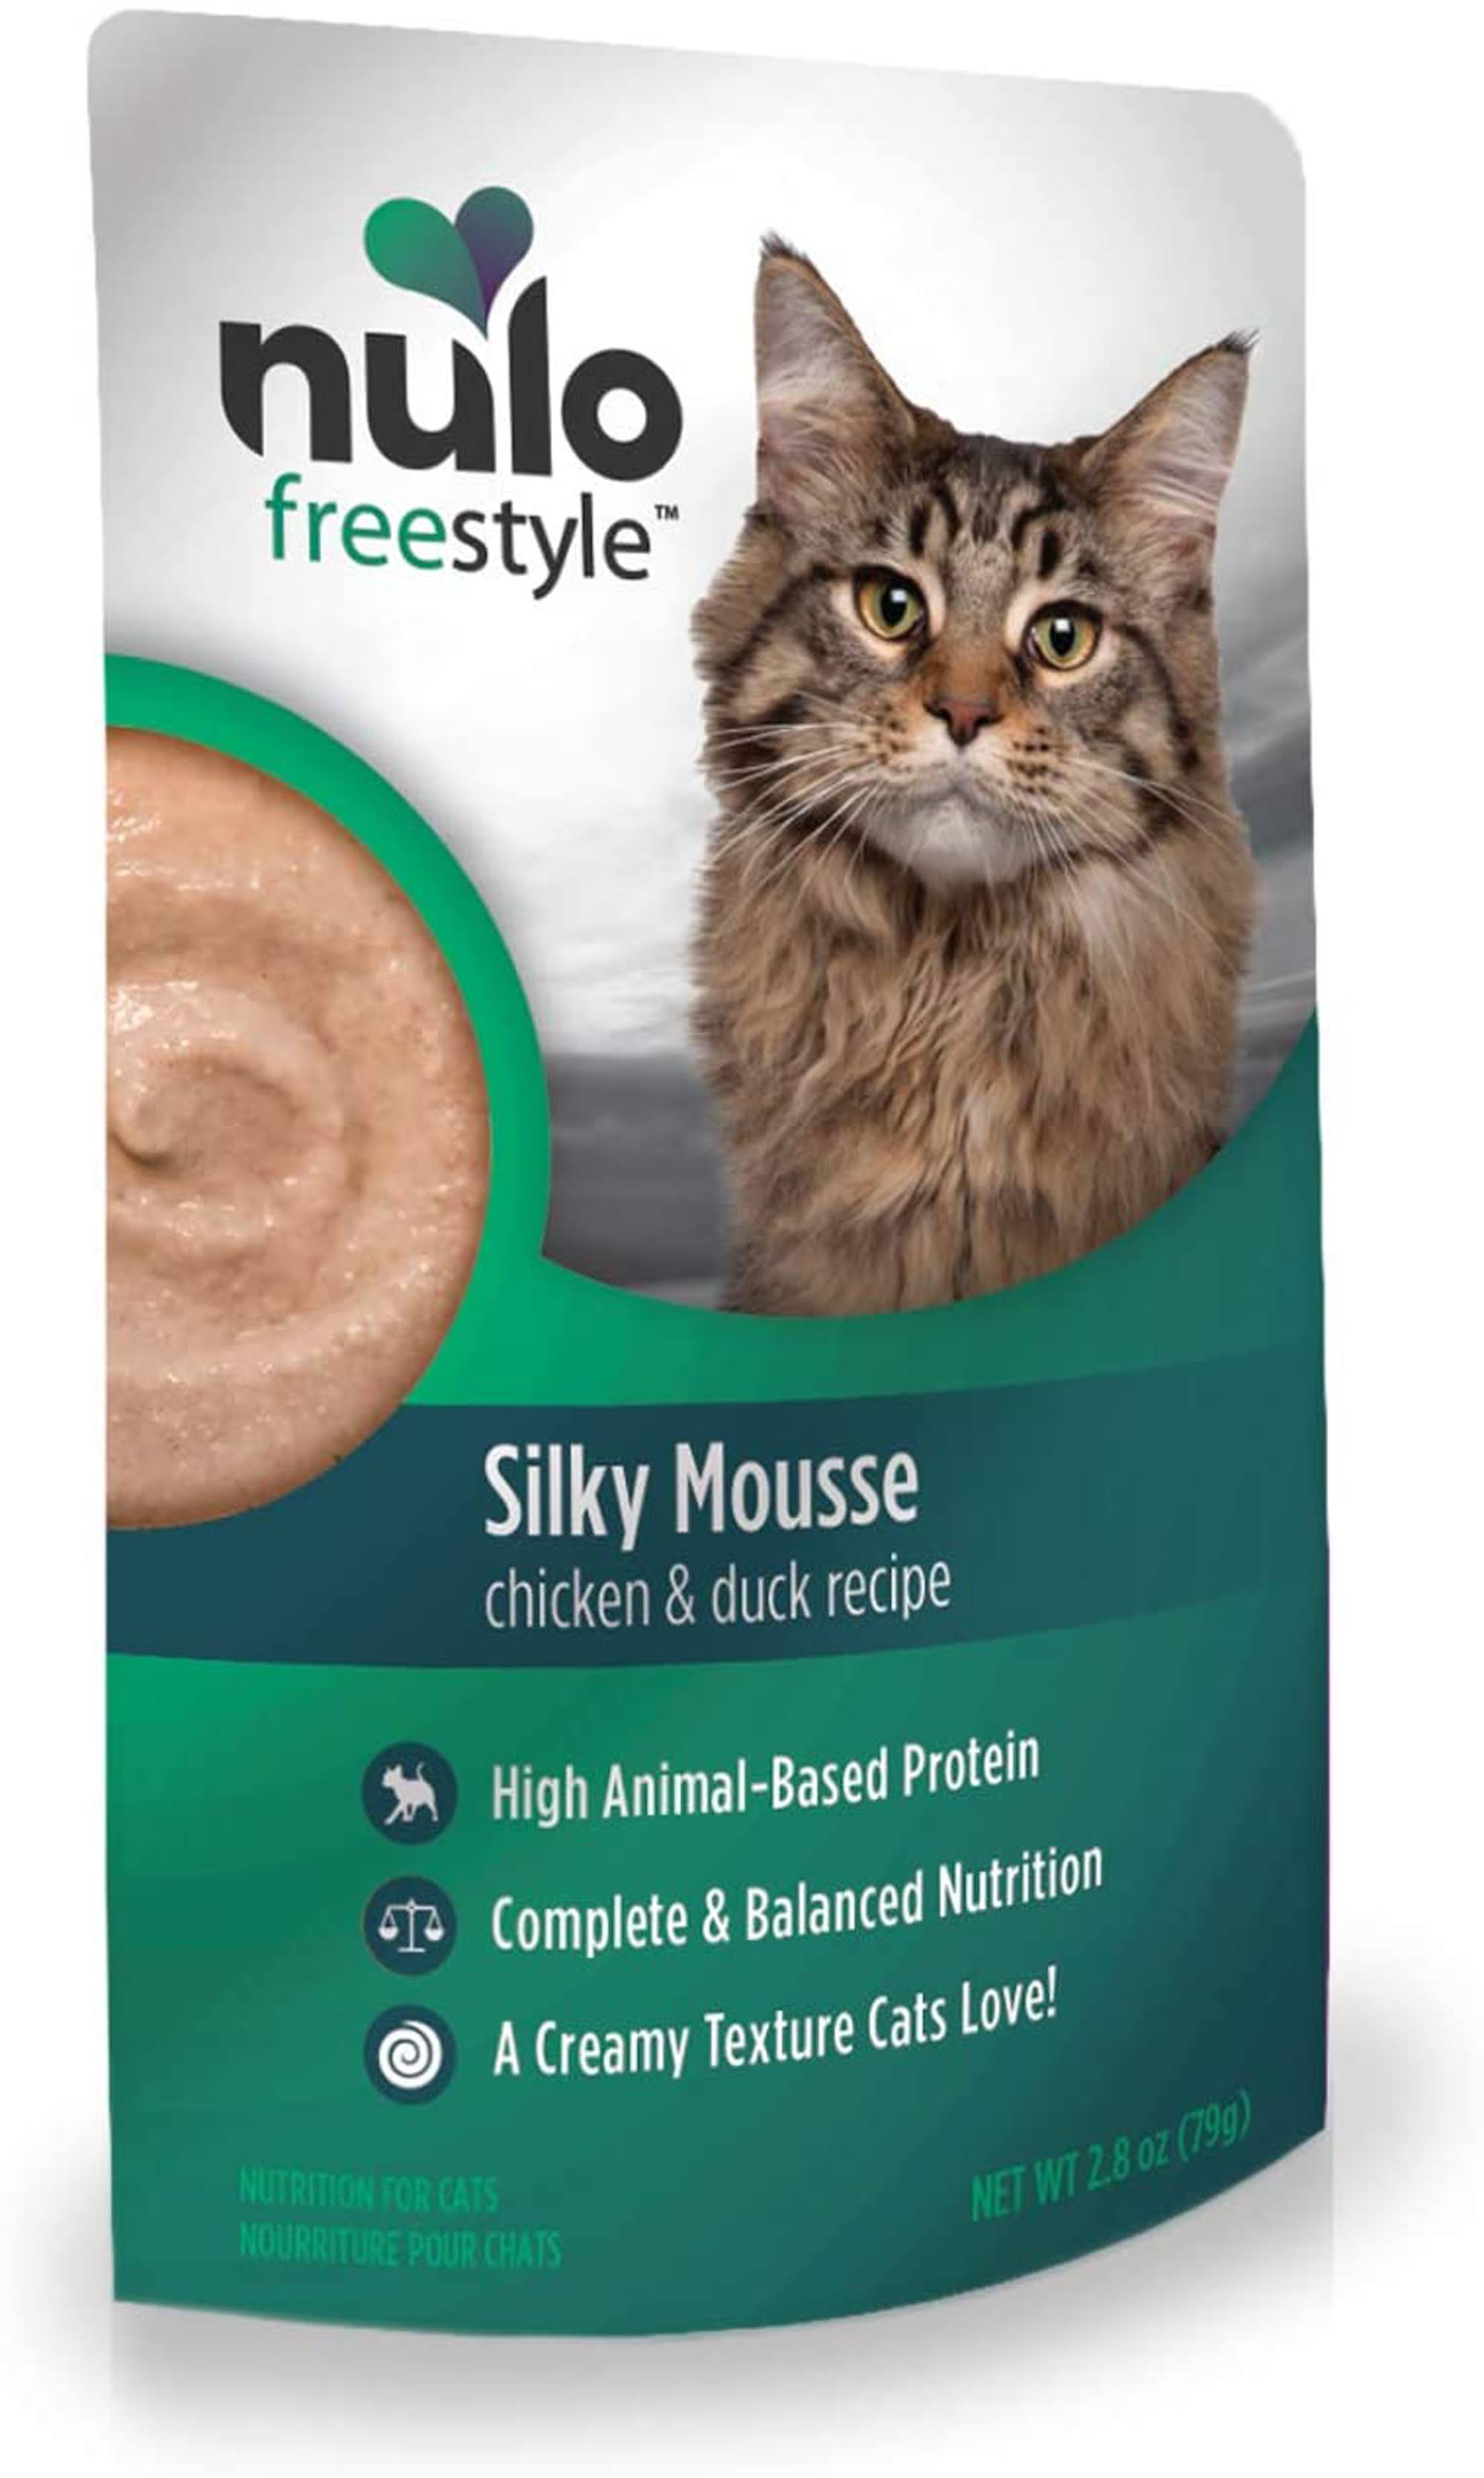 Nulo FreeStyle Cat Food Mousse, Chicken & Duck, Nutritious, Delicious Wet Cat Food With Silky Texture - 2.8 Ounce